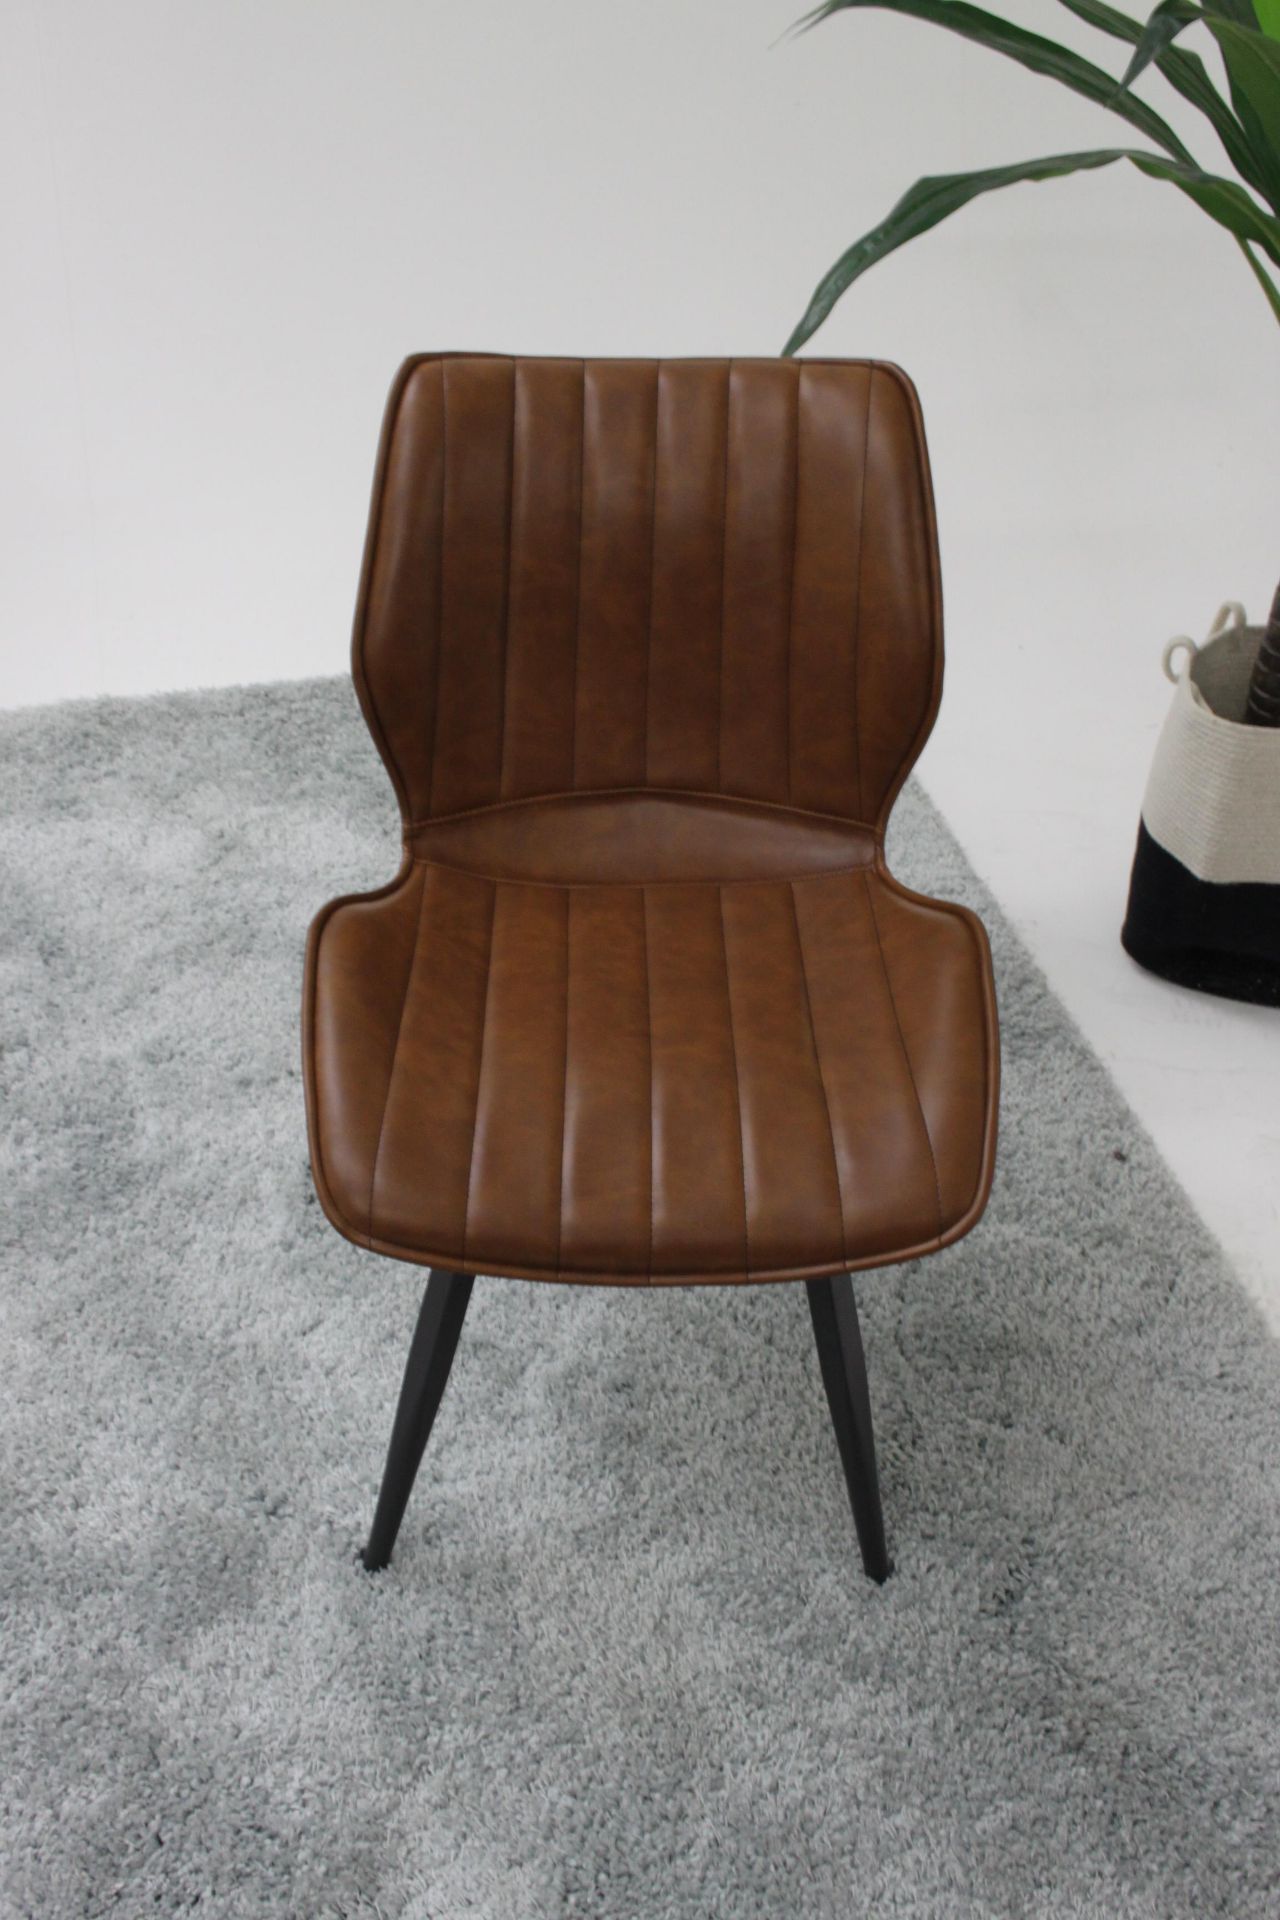 Alfa Ribbed Dining Chair Vegan Leather Tan Diamond Quilted Upholstery Gives A Luxury Finish To These - Image 2 of 4